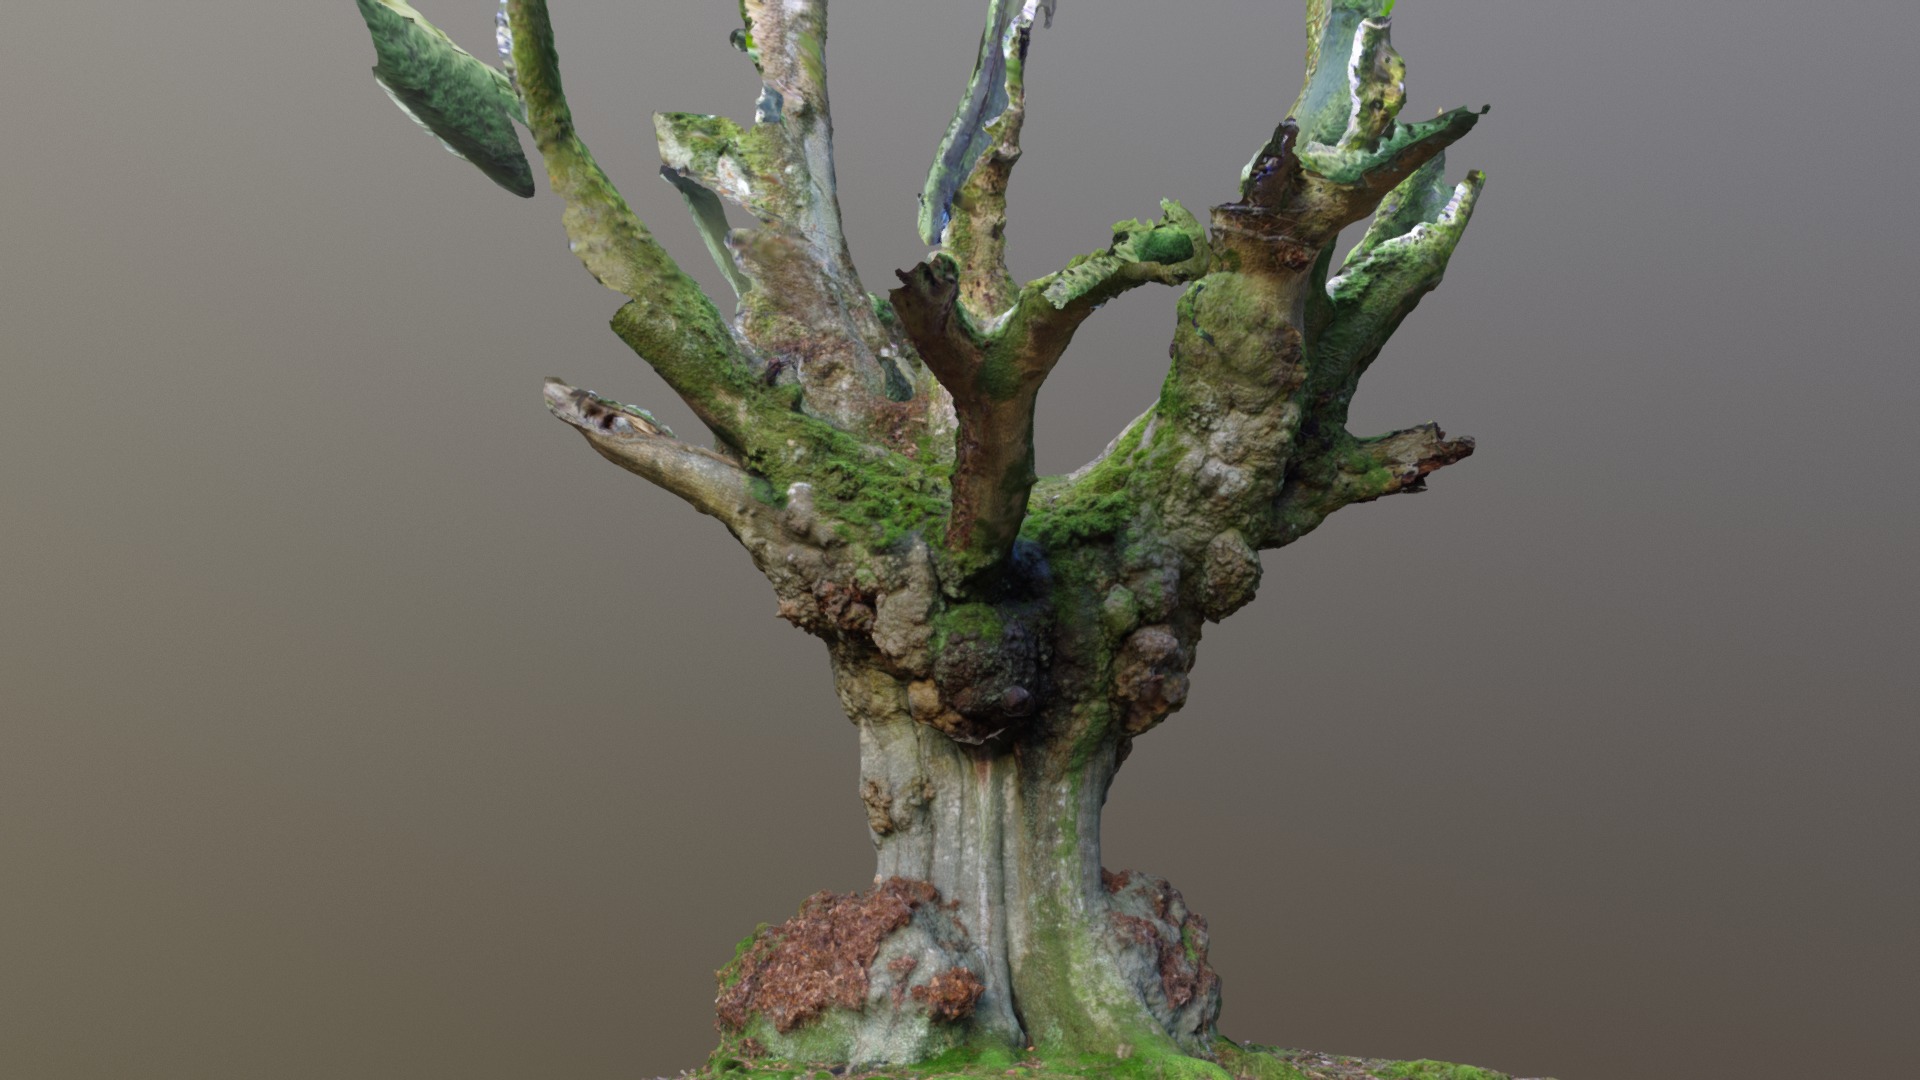 3D model Photogrammetry Beech Tree With Large Burls - This is a 3D model of the Photogrammetry Beech Tree With Large Burls. The 3D model is about a tree with moss growing on it.